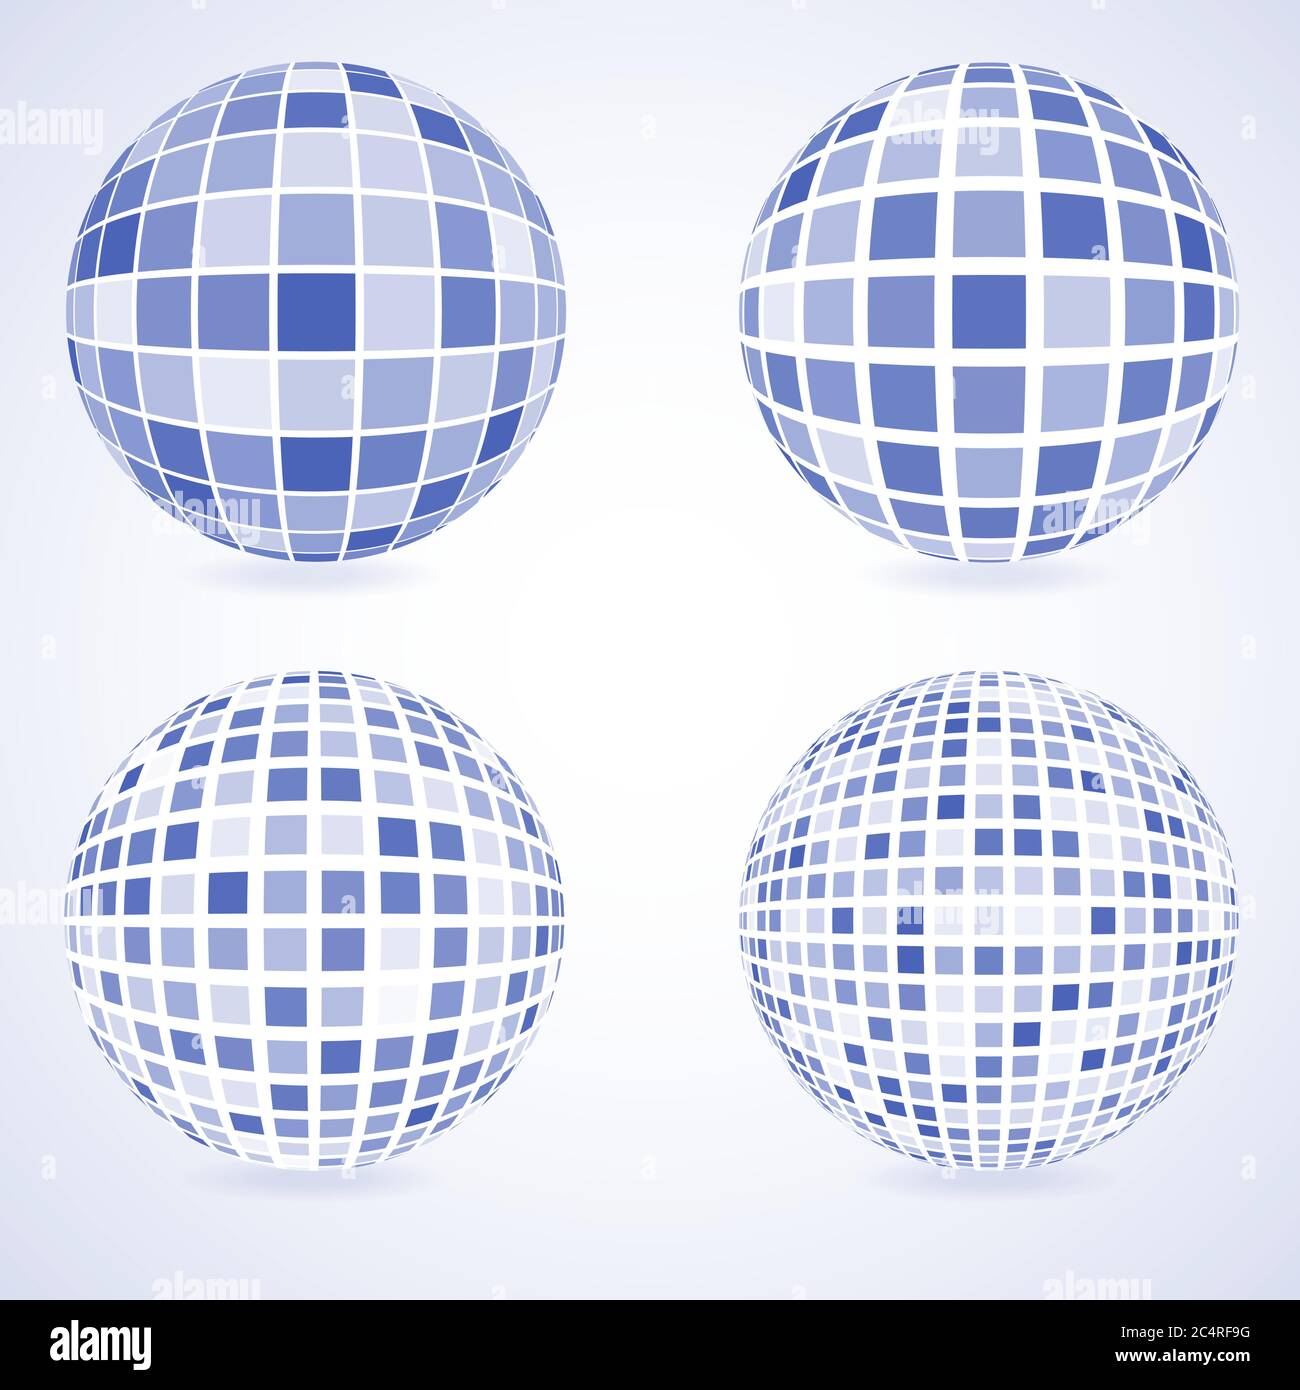 Set of communication vector spheres. Isolated 3d globe icons. Balls with different opacity effect elements. Stock Vector